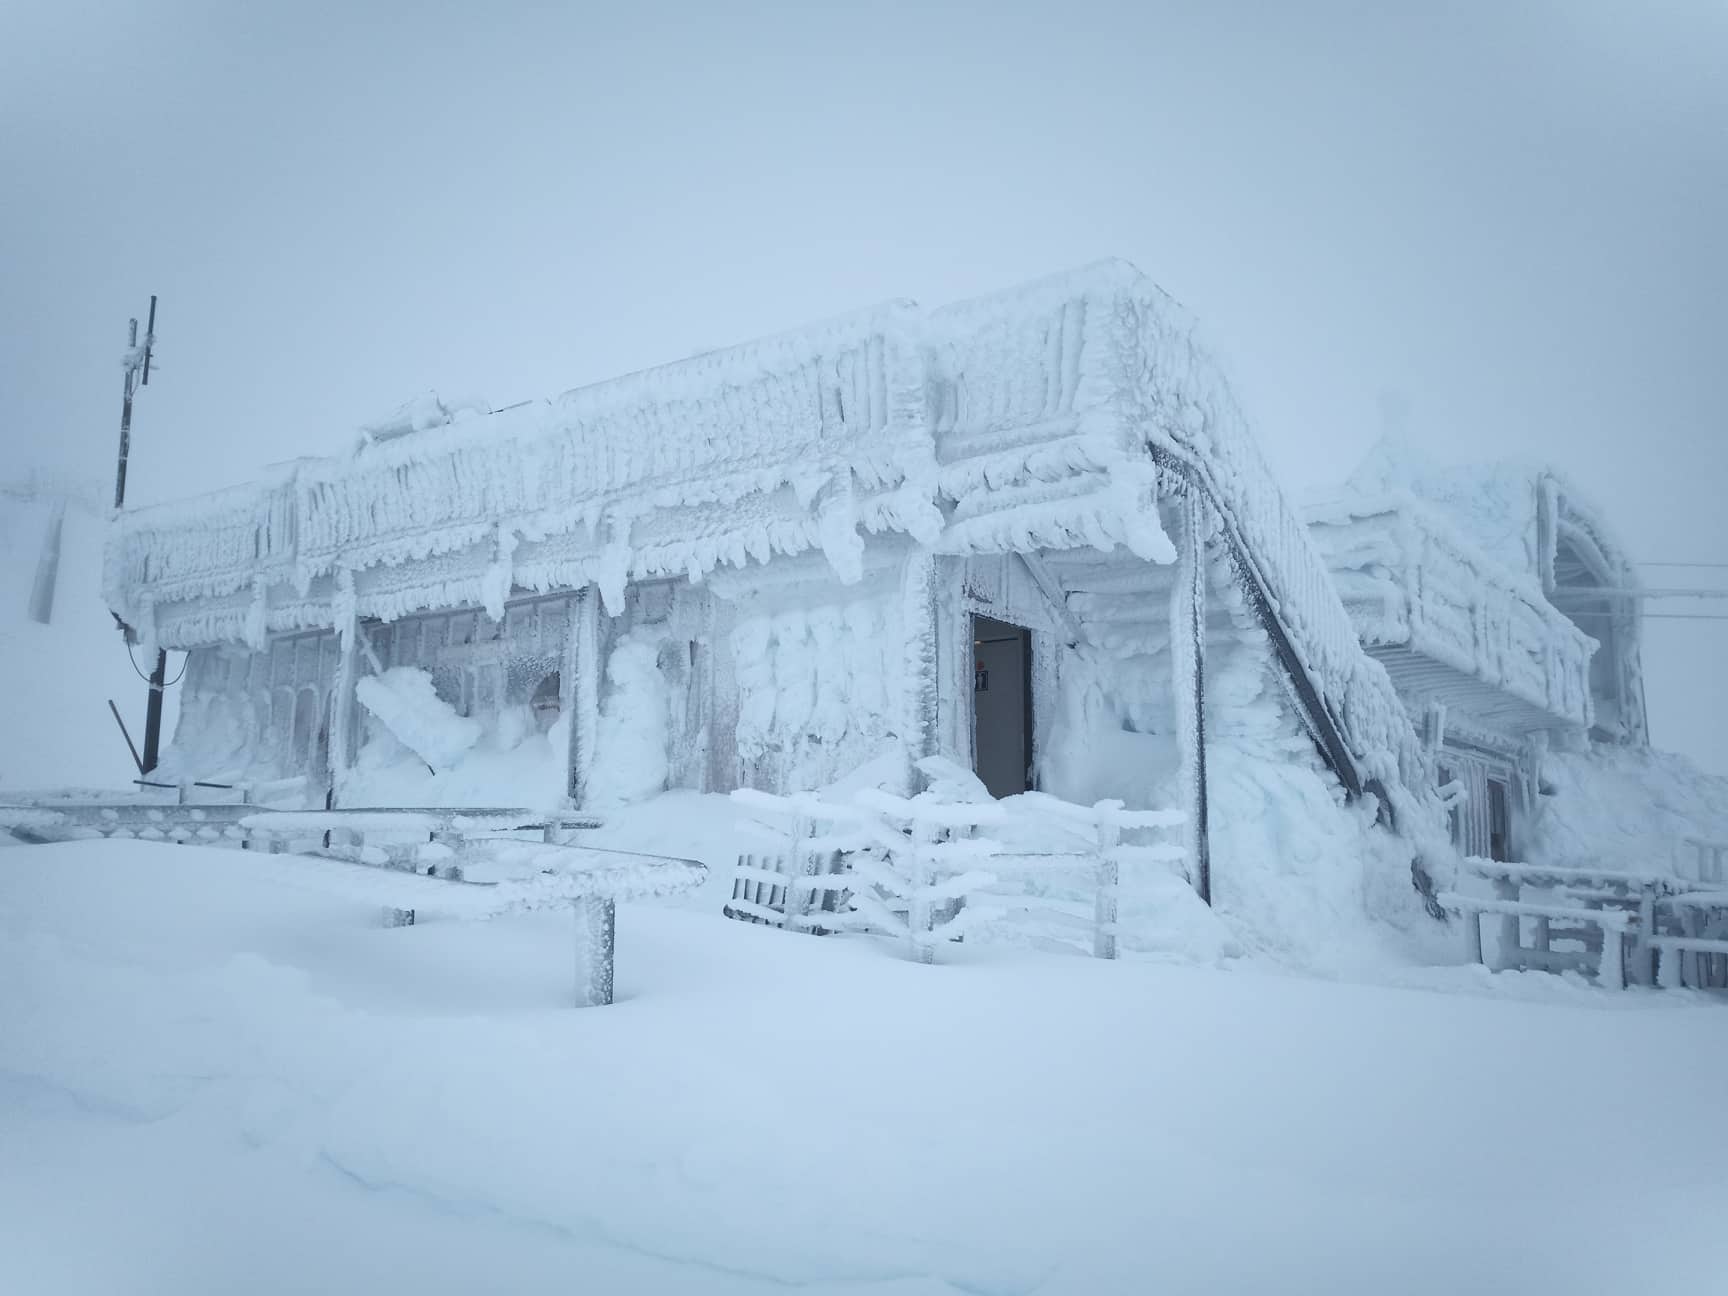 Transformed into an impressive ice palace in the mist., Turoa